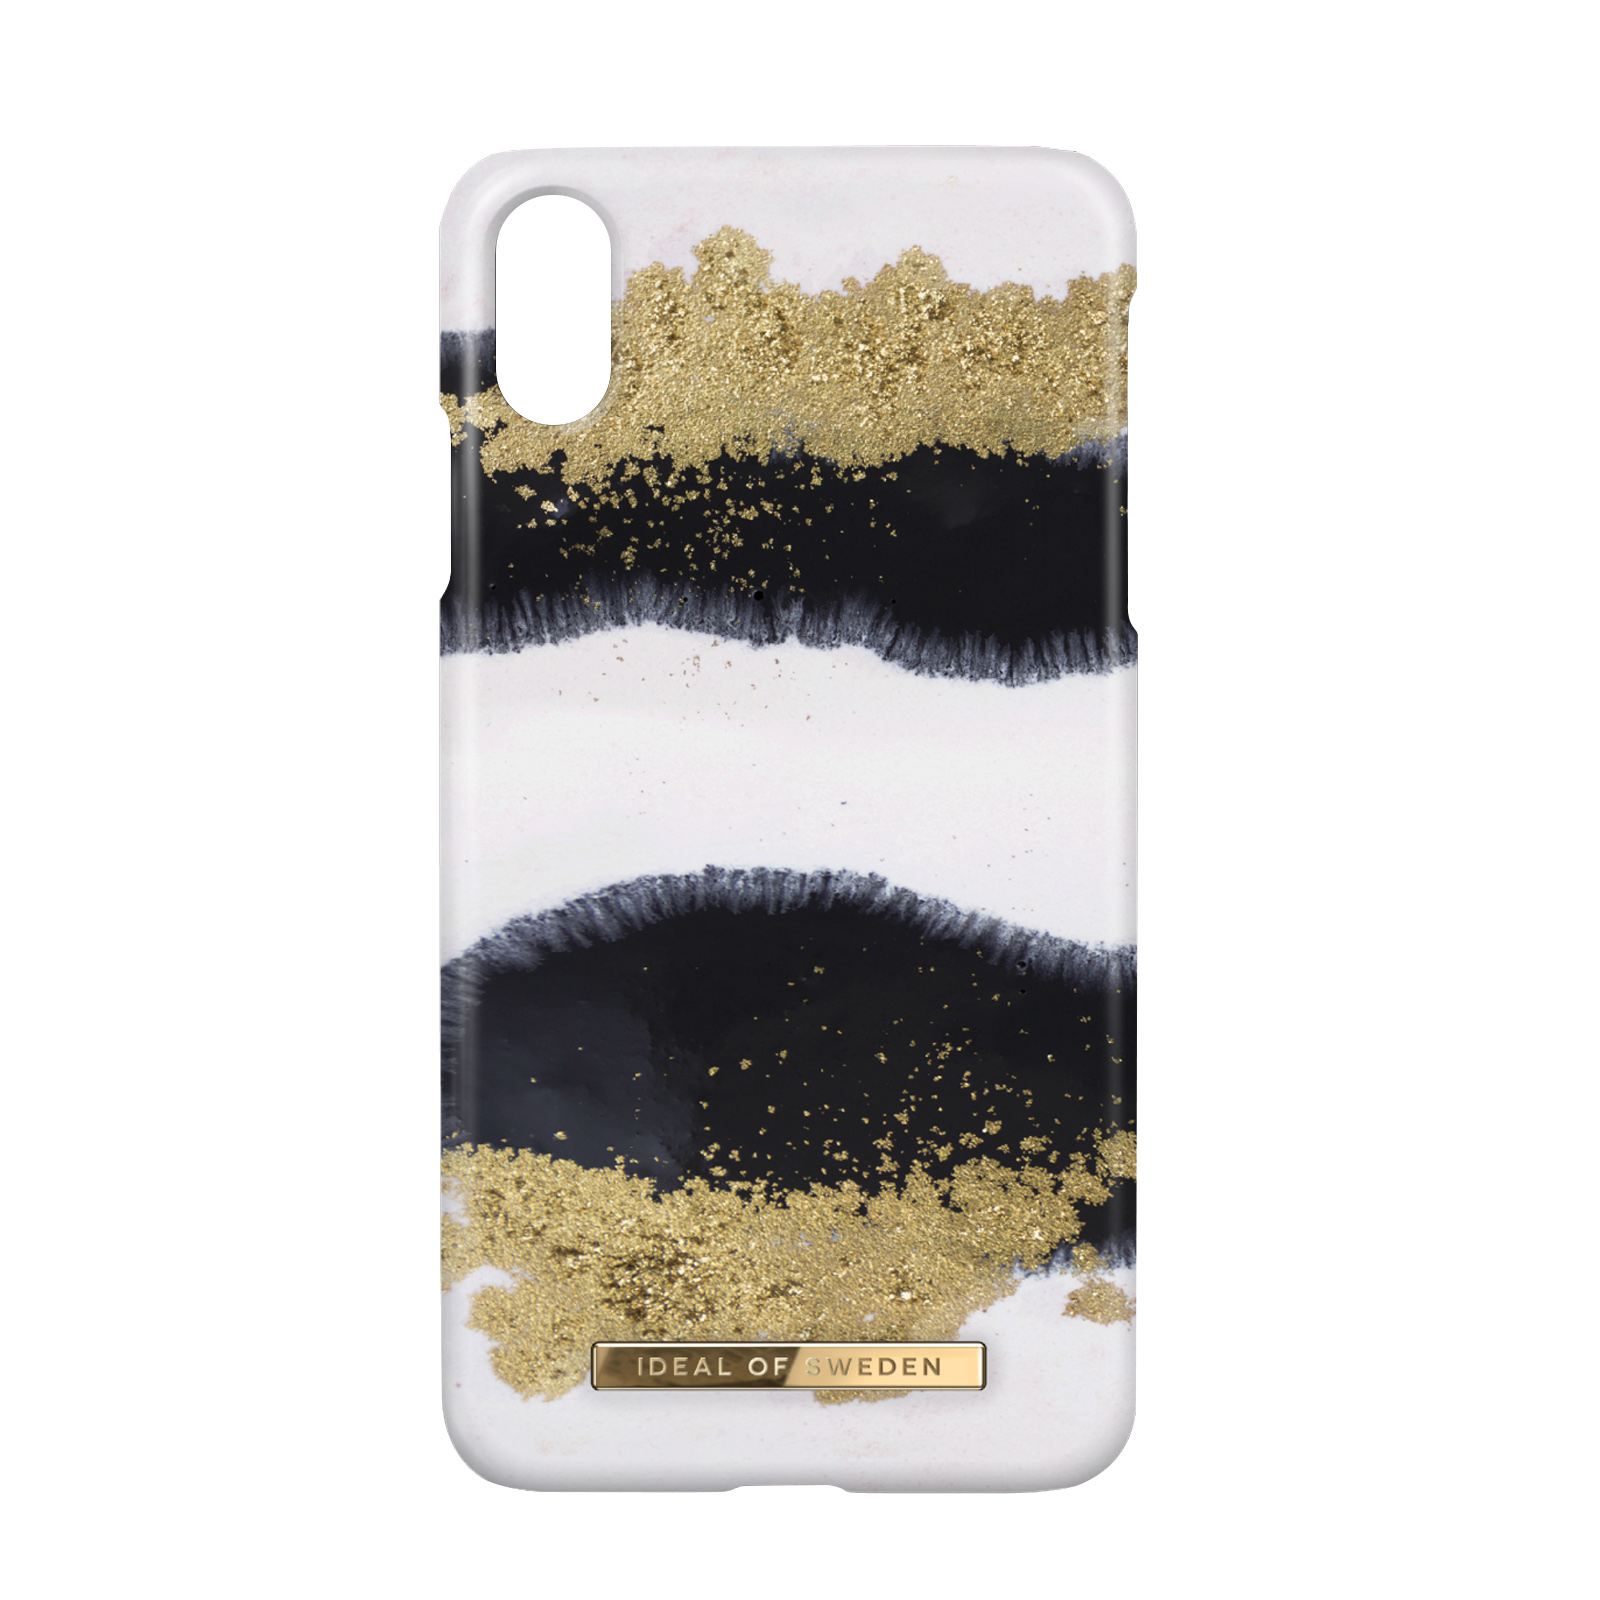 Licorice iPhone OF SWEDEN Backcover, Series, Gold XR, IDEAL Gleaming Apple,